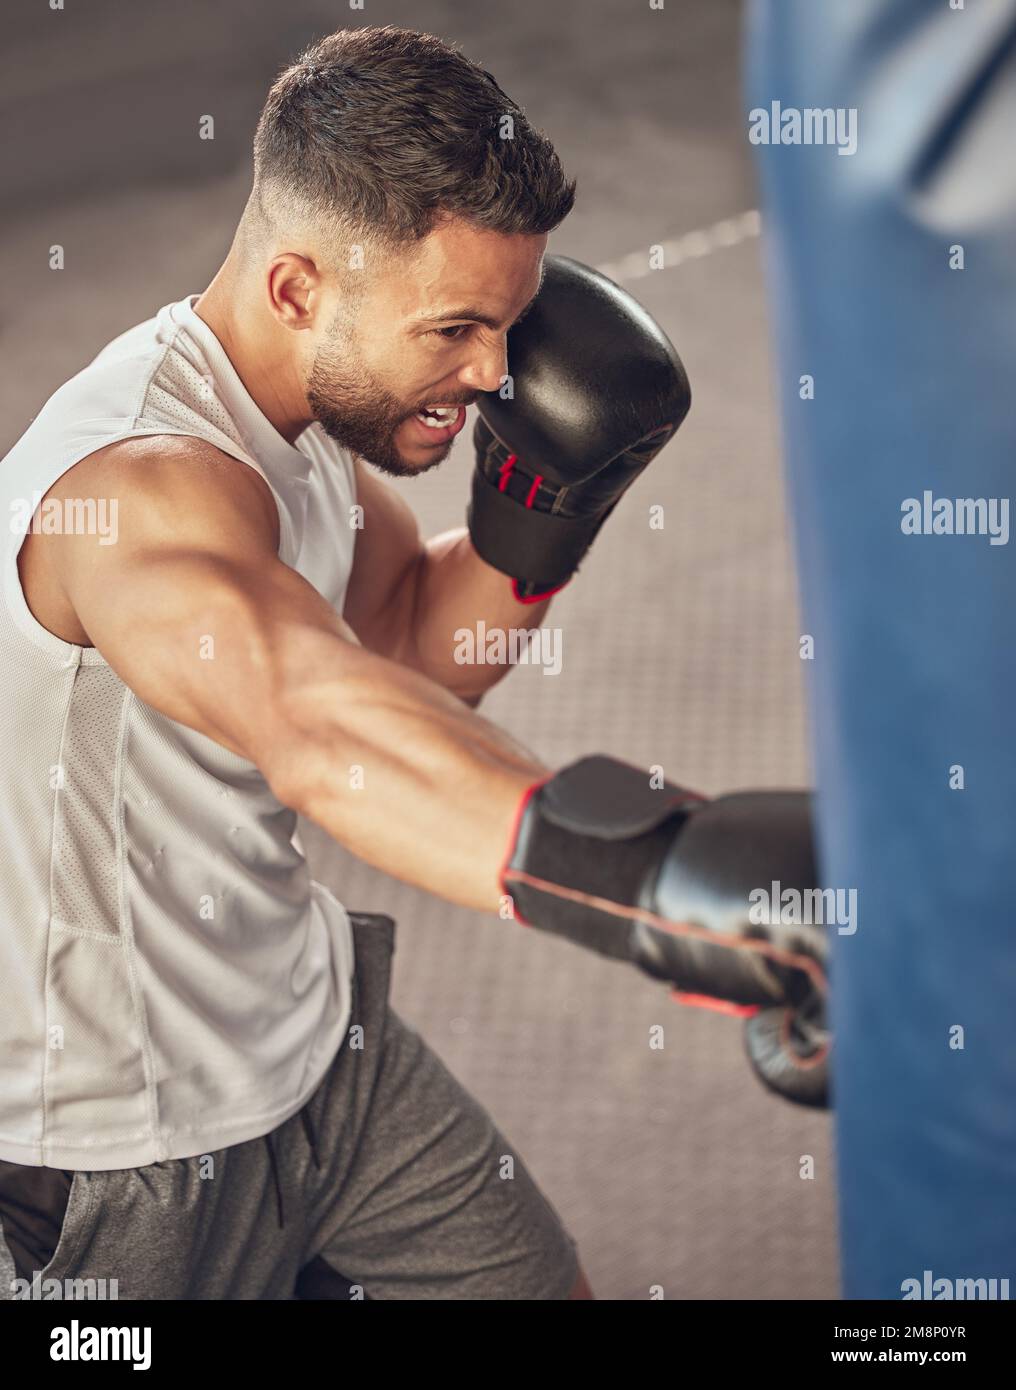 Strong boxer hitting punching bag. Mma fighter wearing boxing gloves in combat training. Bodybuilder doing cardio training in the gym. Active boxer Stock Photo